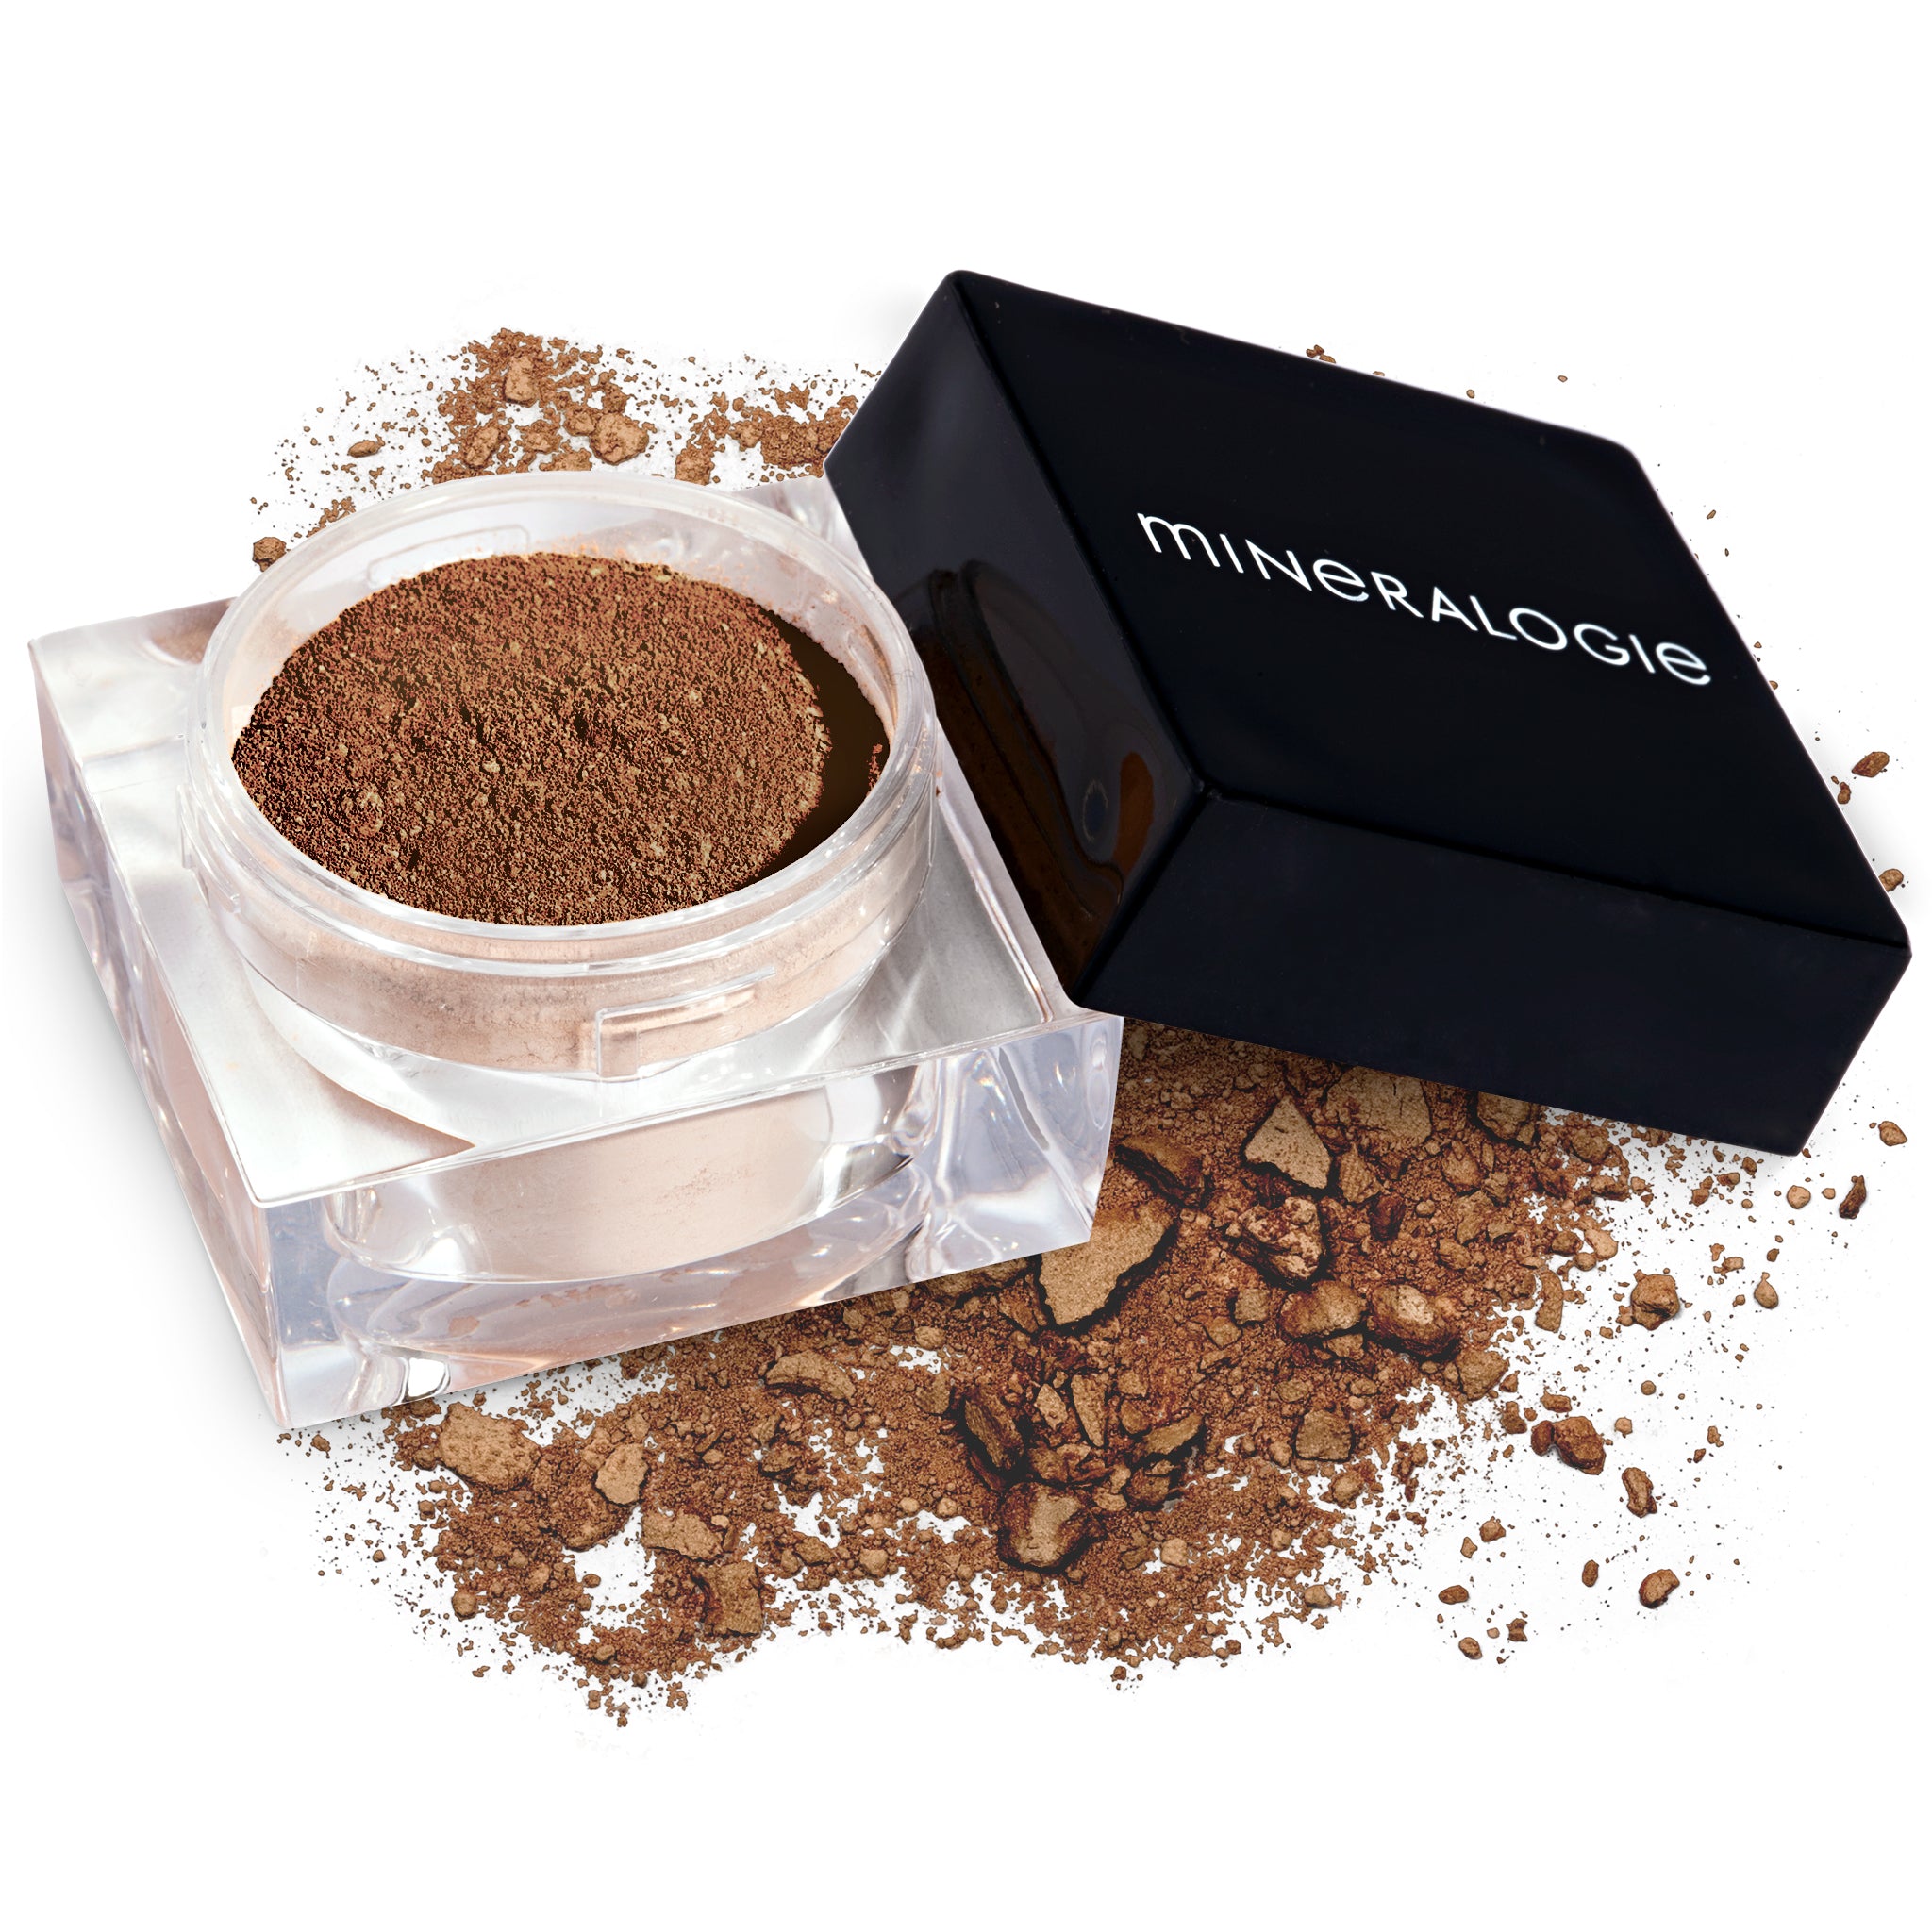 CLEAR Mattifying Loose Mineral Foundation by Minerologie